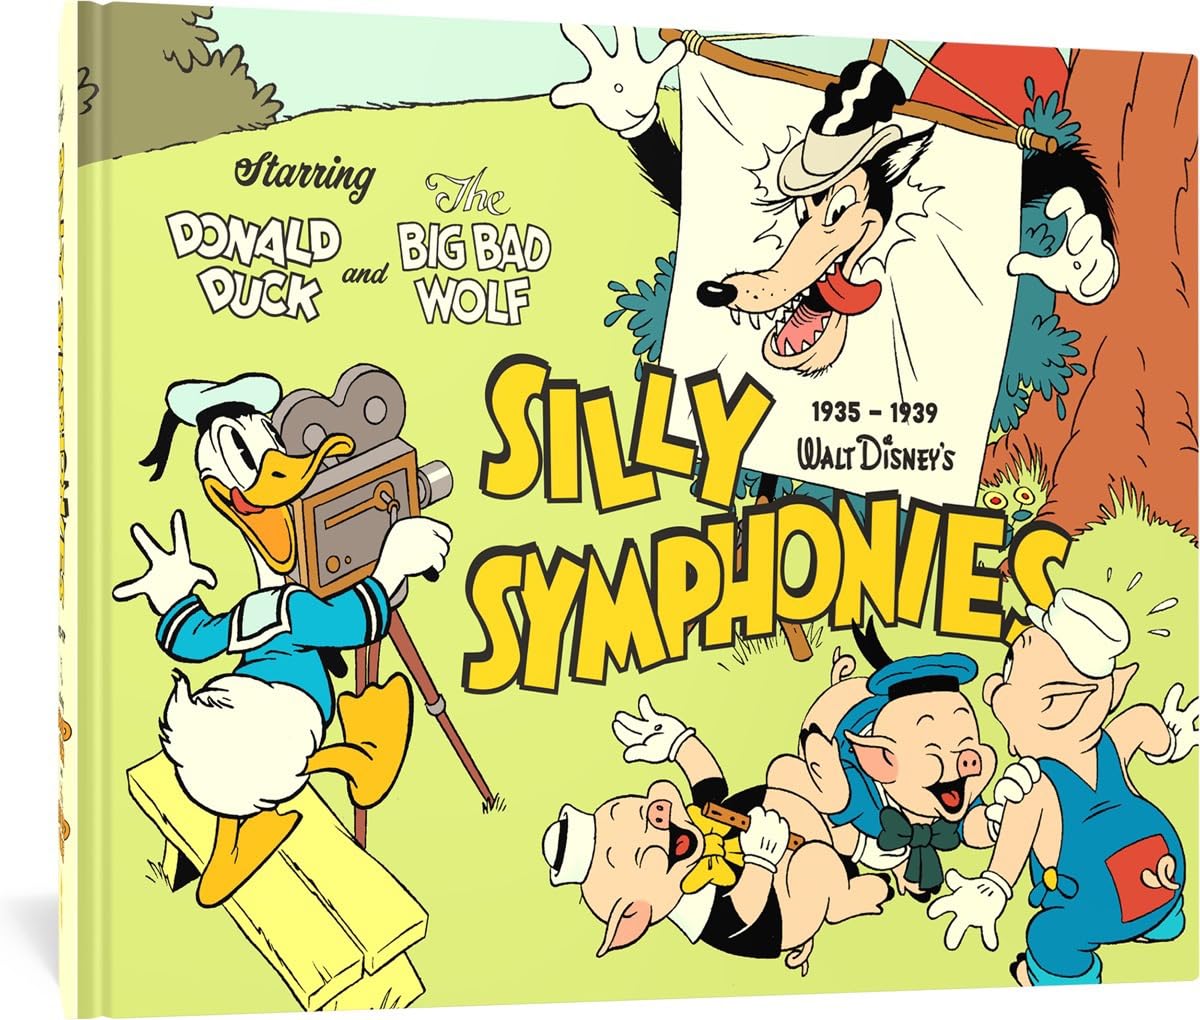 Walt Disney Silly Symphonies Hardcover 1935-1939: Starring Donald Duck and the Big Bad Wolf